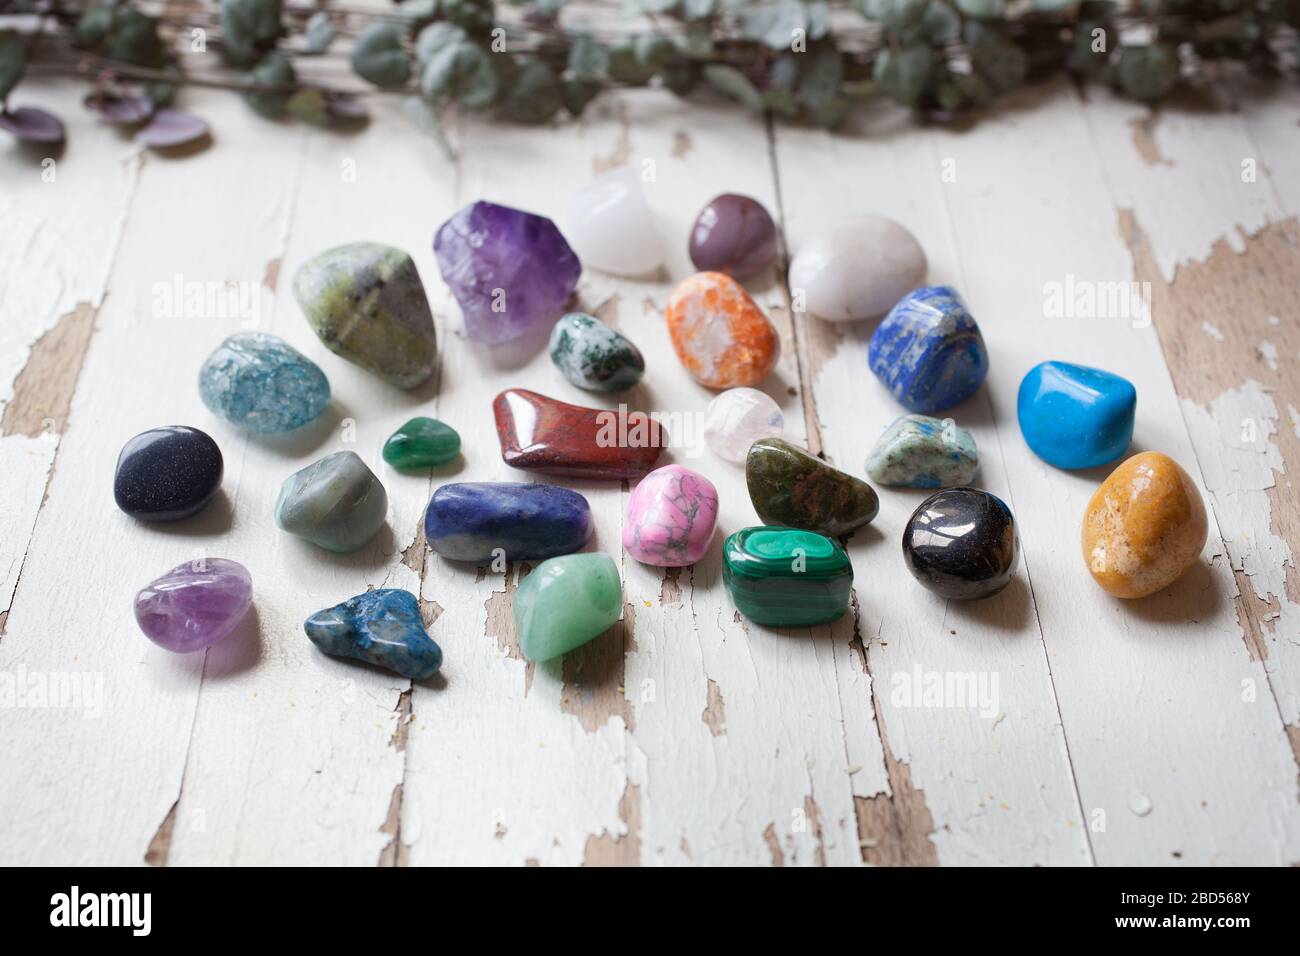 A selection of beautiful gemstones photographed against a white rustic background Stock Photo